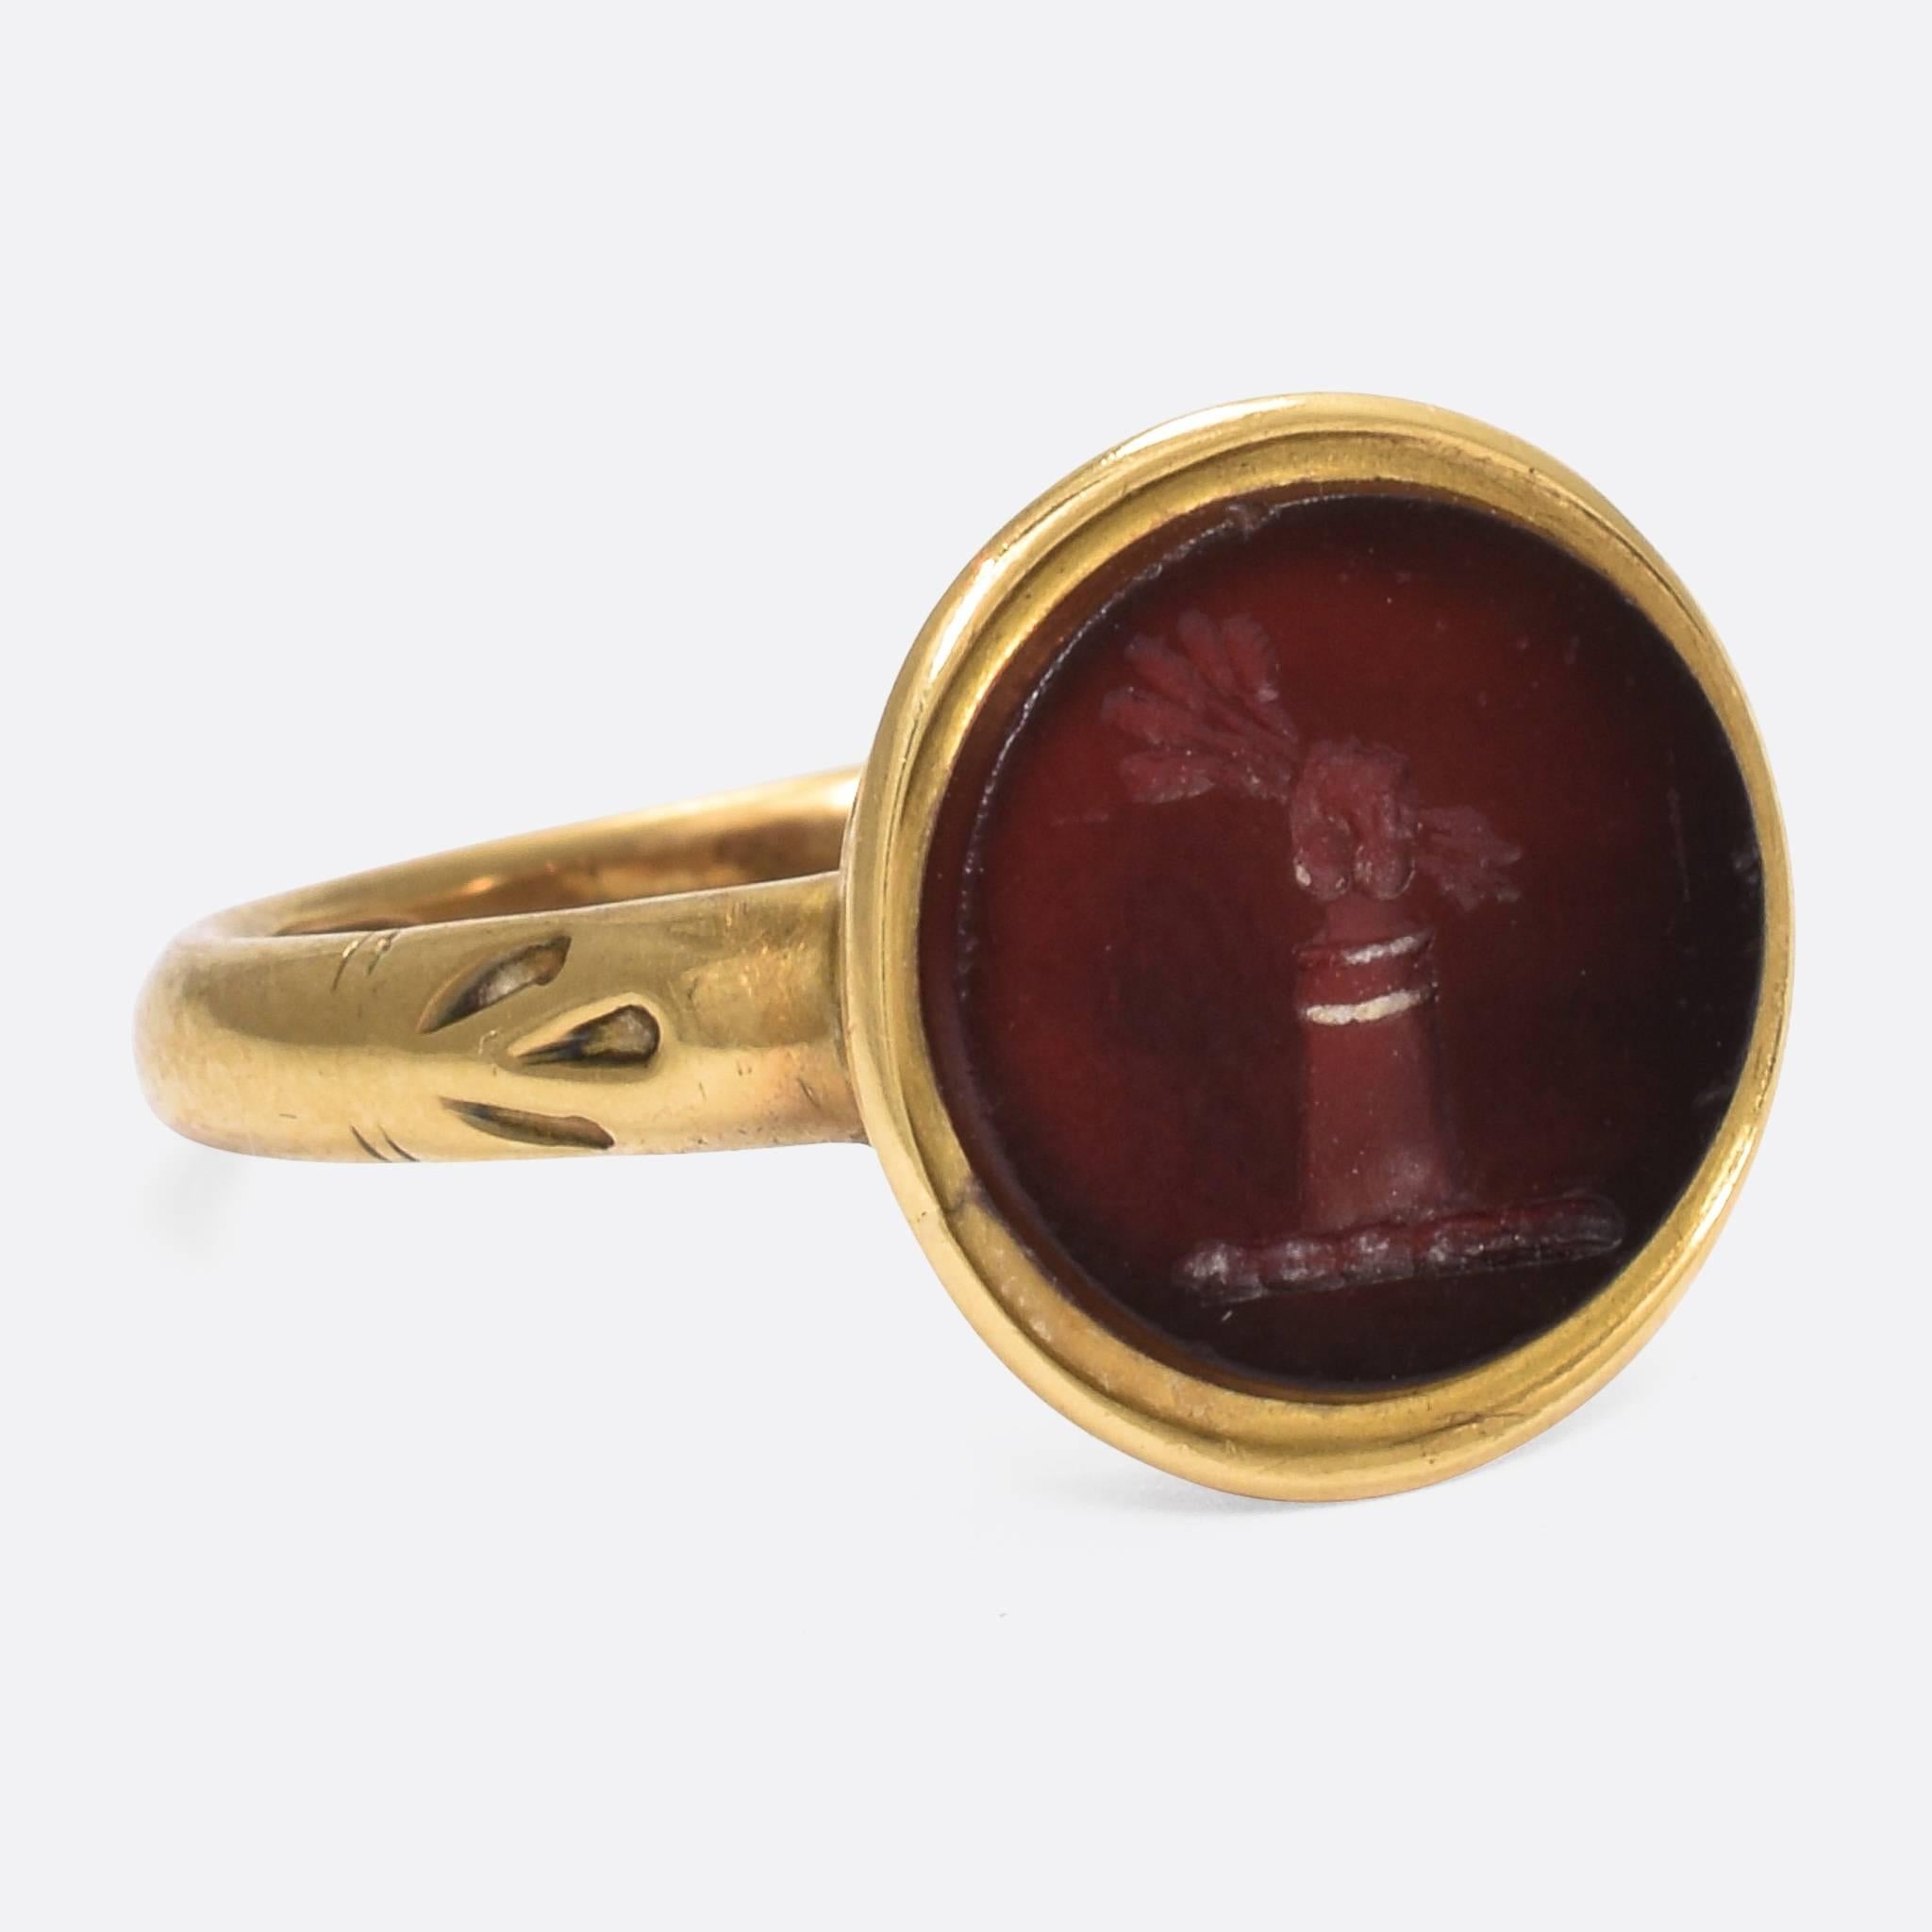 A cool Victorian signet ring made the the highly esteemed jeweller Charles Green & Son. It's modelled in 18k yellow gold, the round carnelian panel carved with an English heraldic crest that, according to Fairbairn, belonged to the Denny, Matcham,